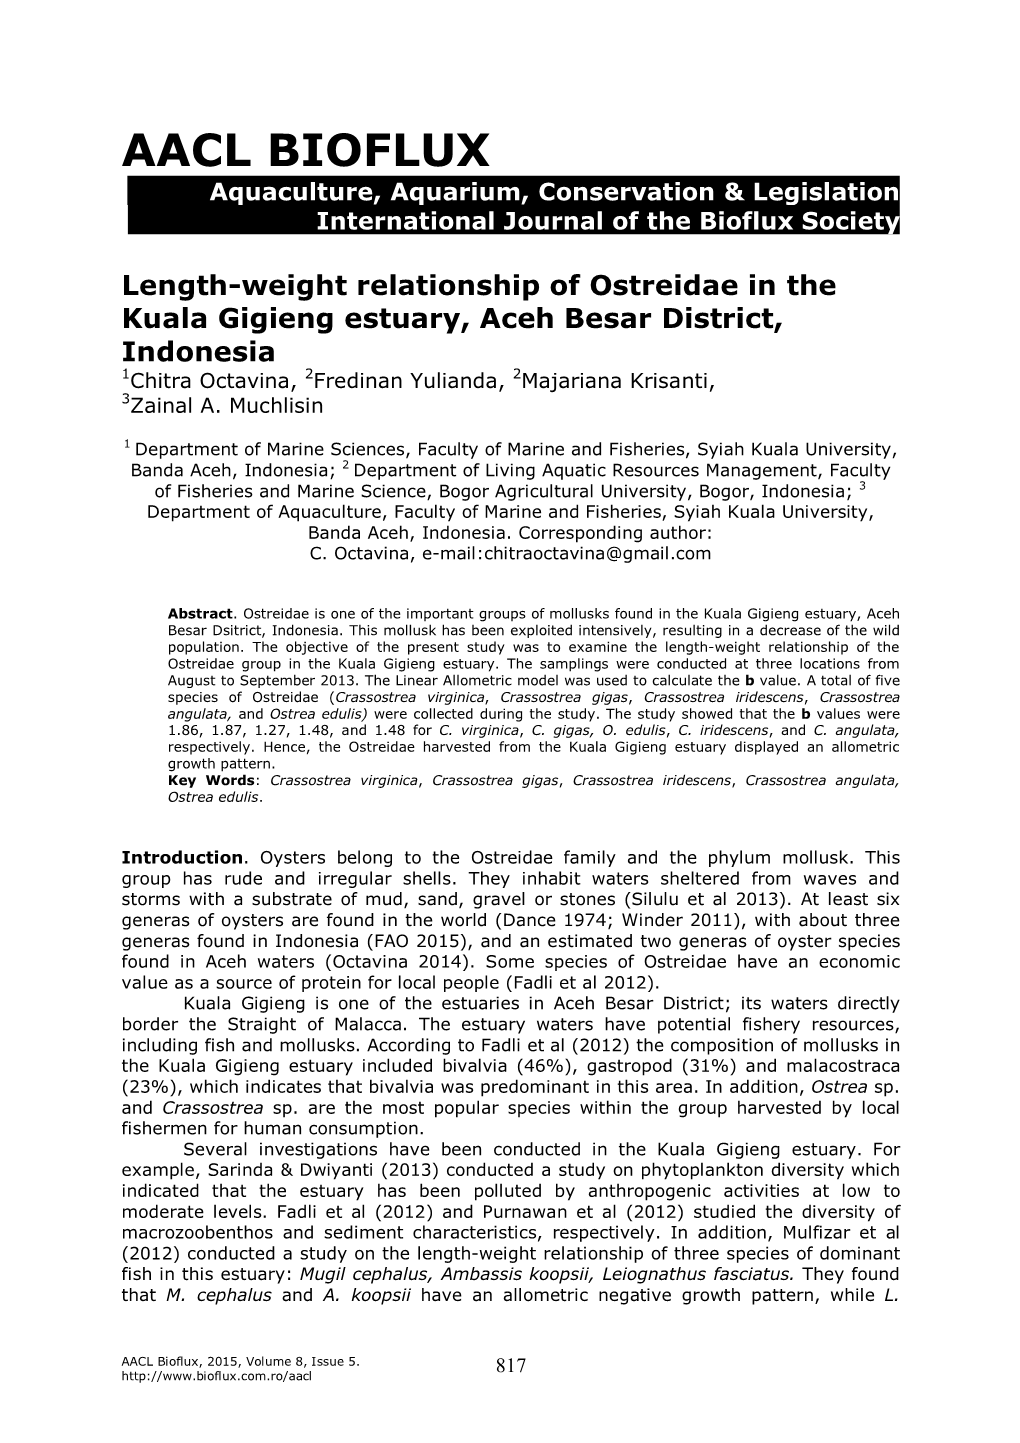 Length-Weight Relationship of Ostreidae in the Kuala Gigieng